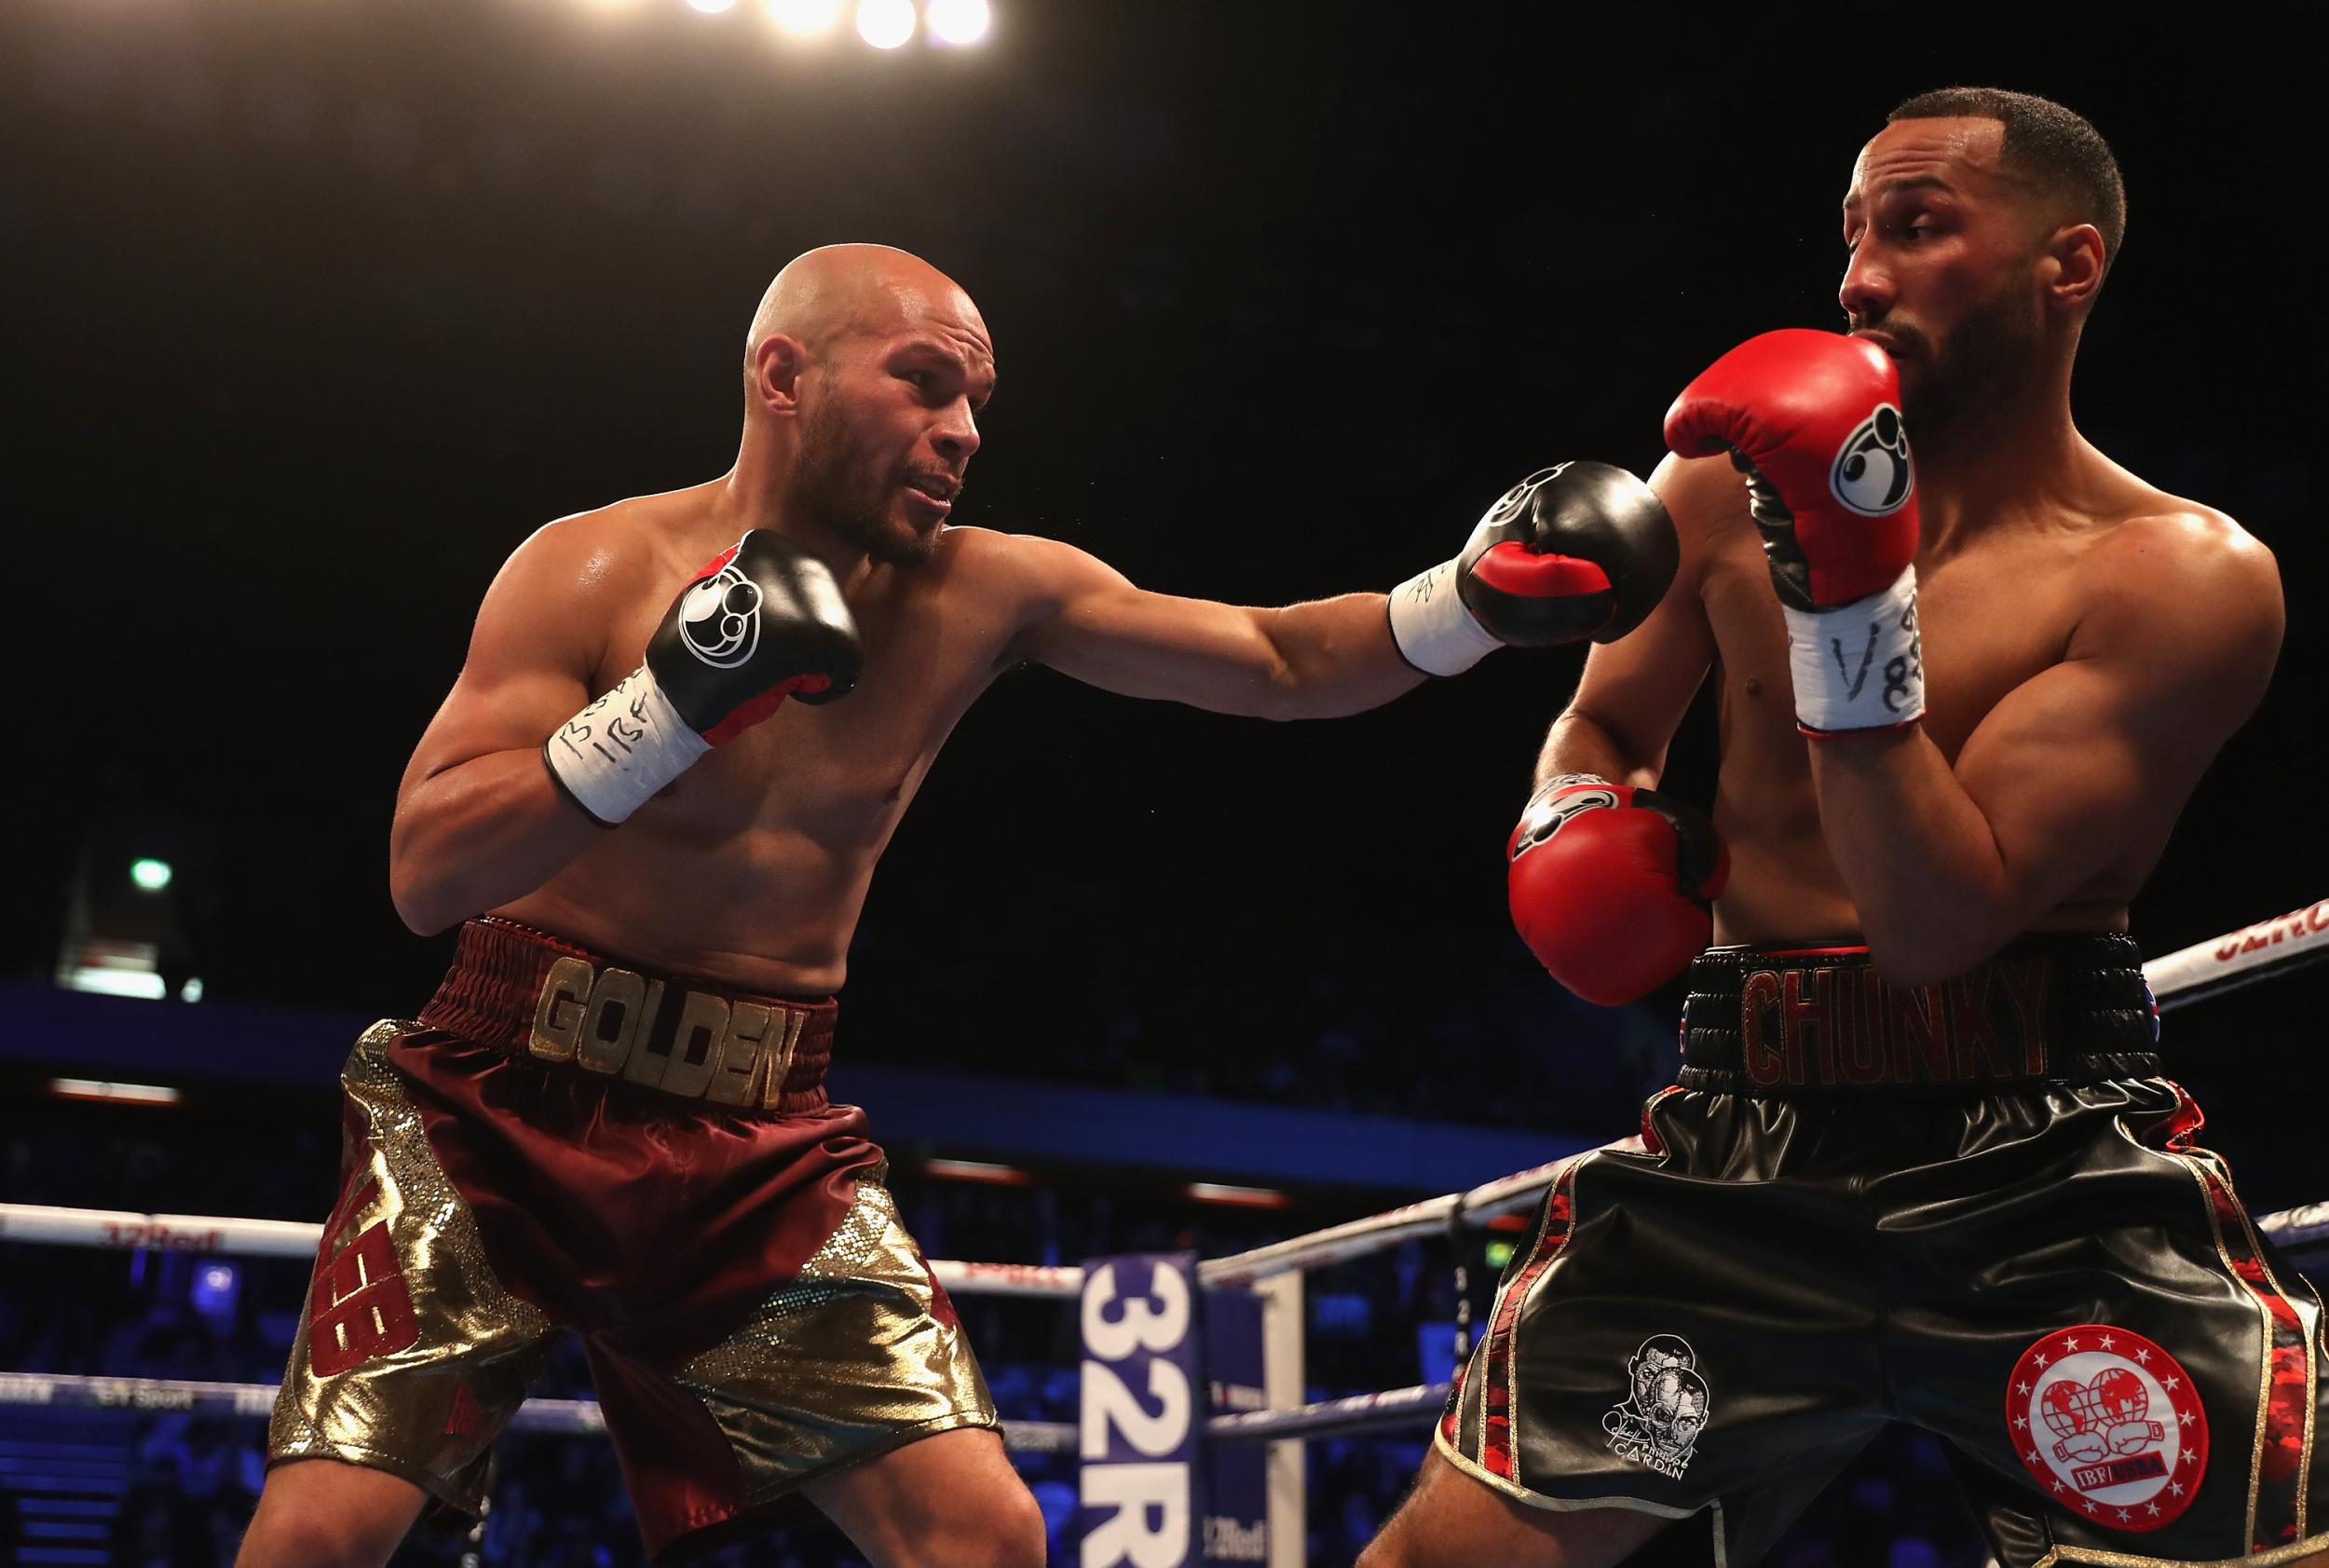 DeGale was far too tentative in his fight against Truax